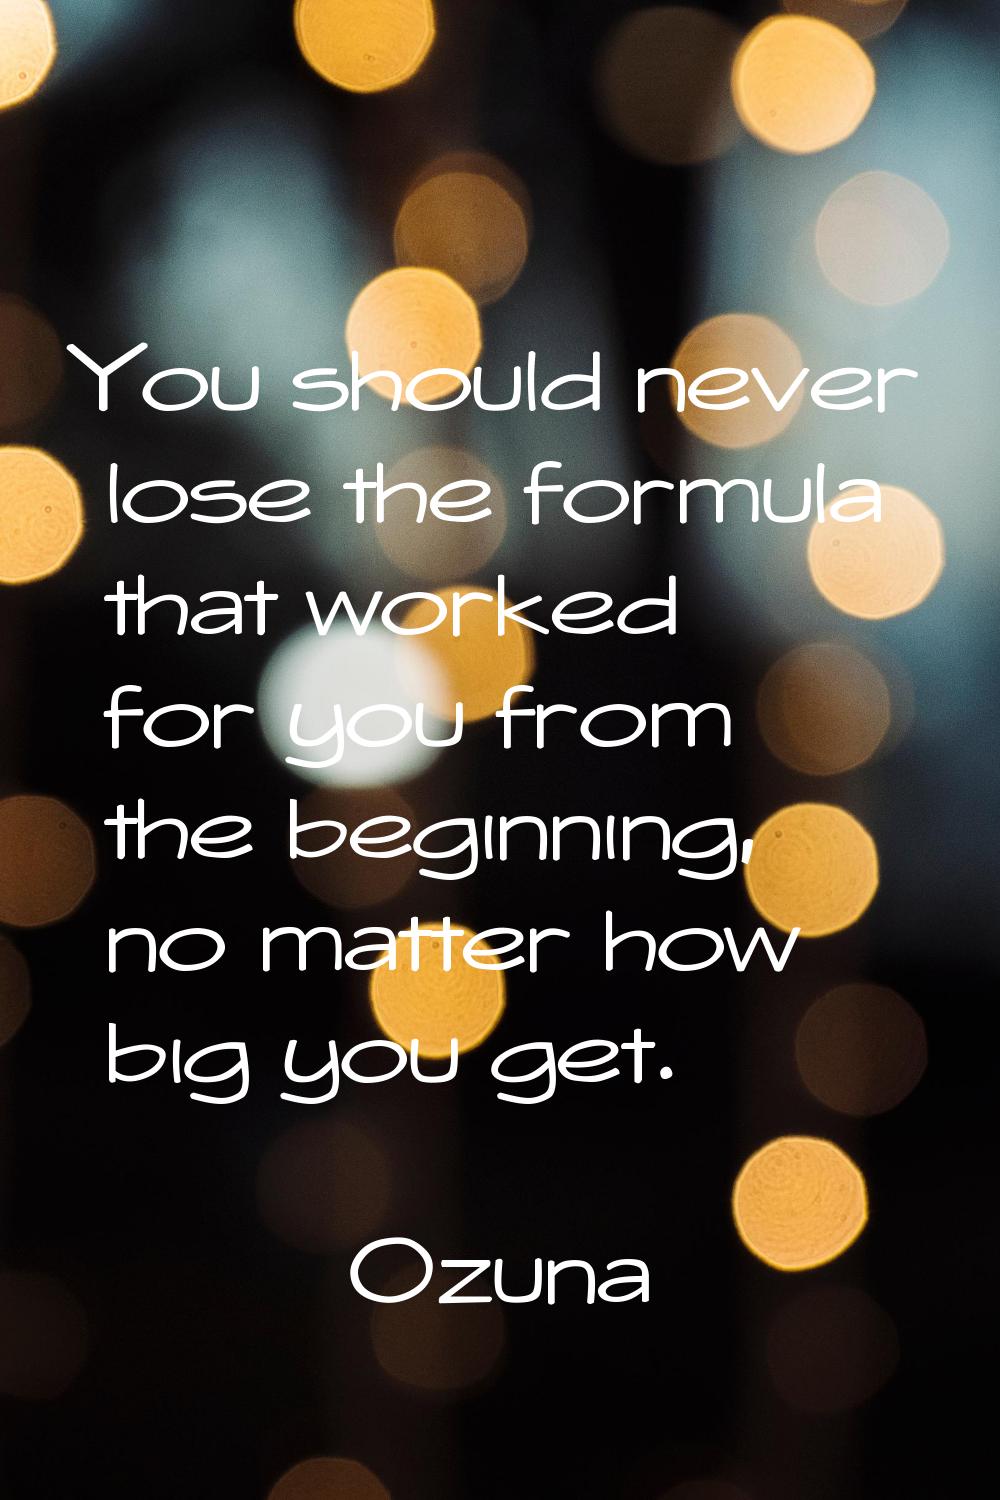 You should never lose the formula that worked for you from the beginning, no matter how big you get